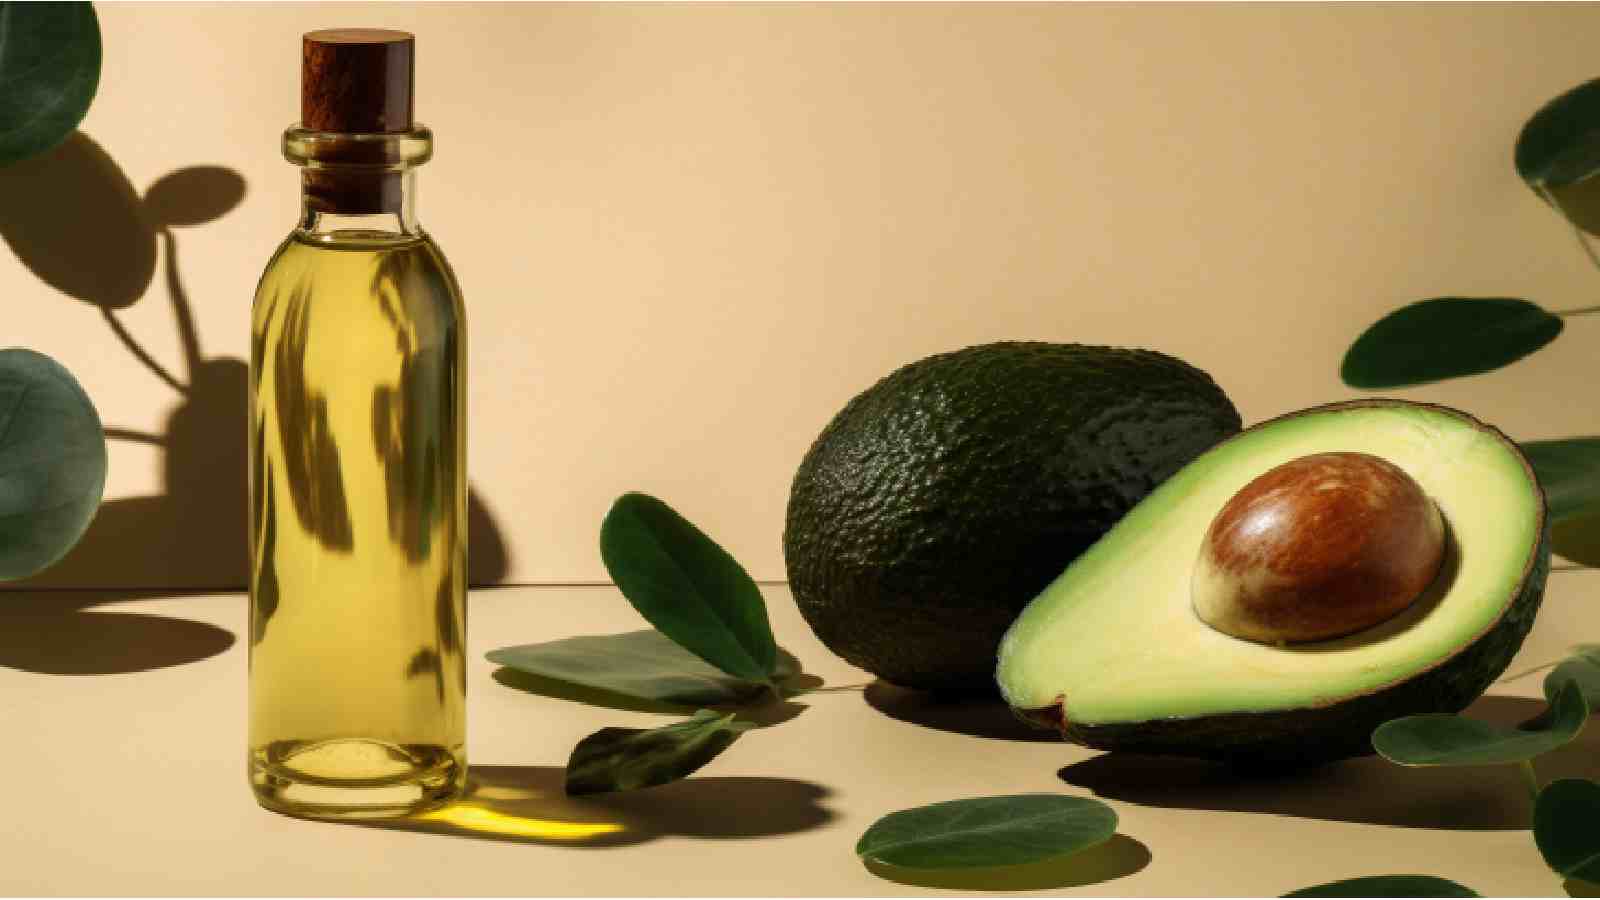 Beauty benefits of avocado oil A natural remedy for dry